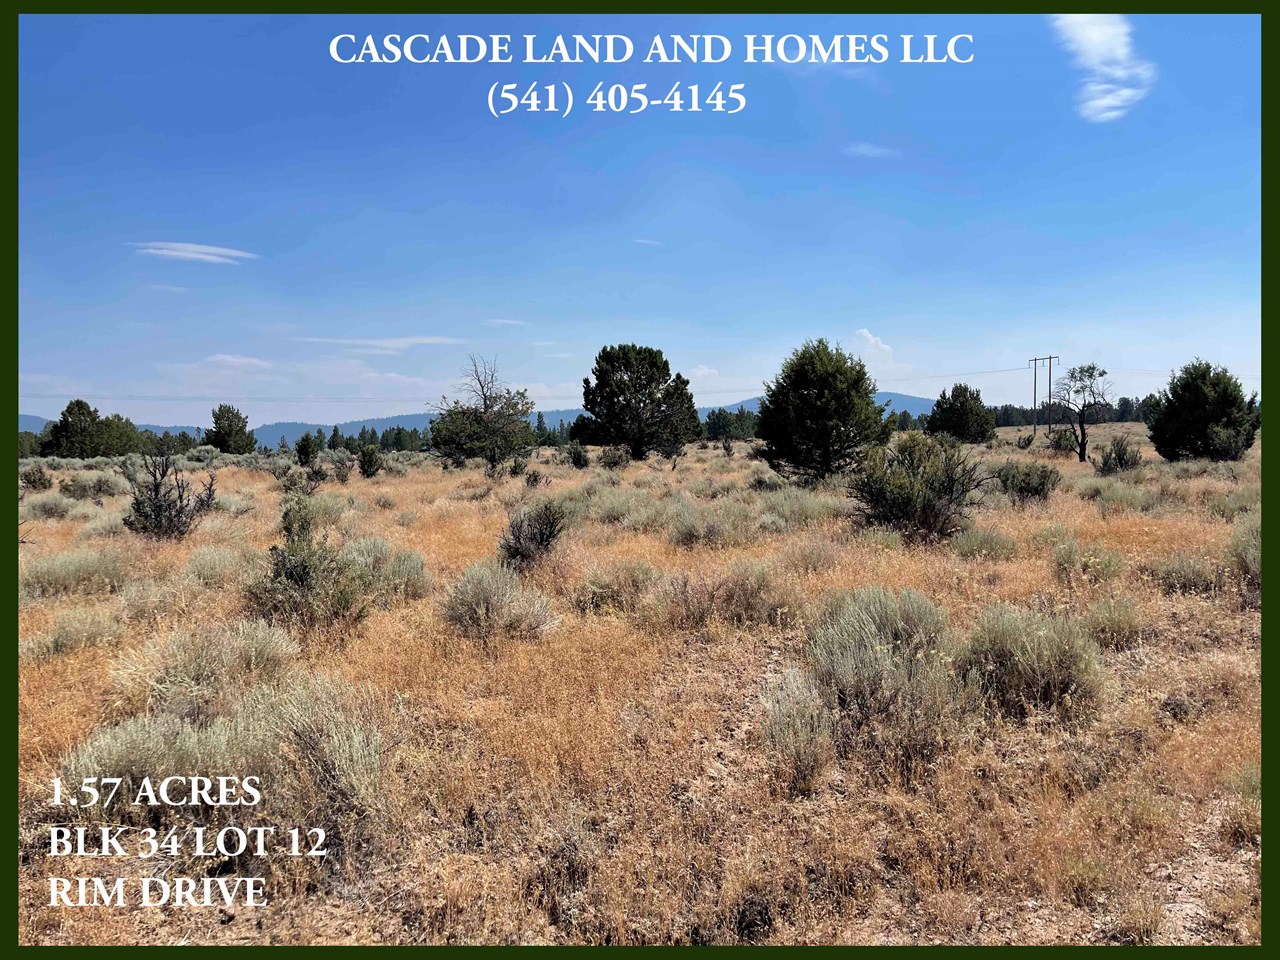 there are several trees on the property and native shrubs and grasses. it is high desert here, and the natural landscape remains largely undisturbed. the property is in a more secluded part of the subdivision, so if you are looking for privacy in a rural surrounding, this may be the place!